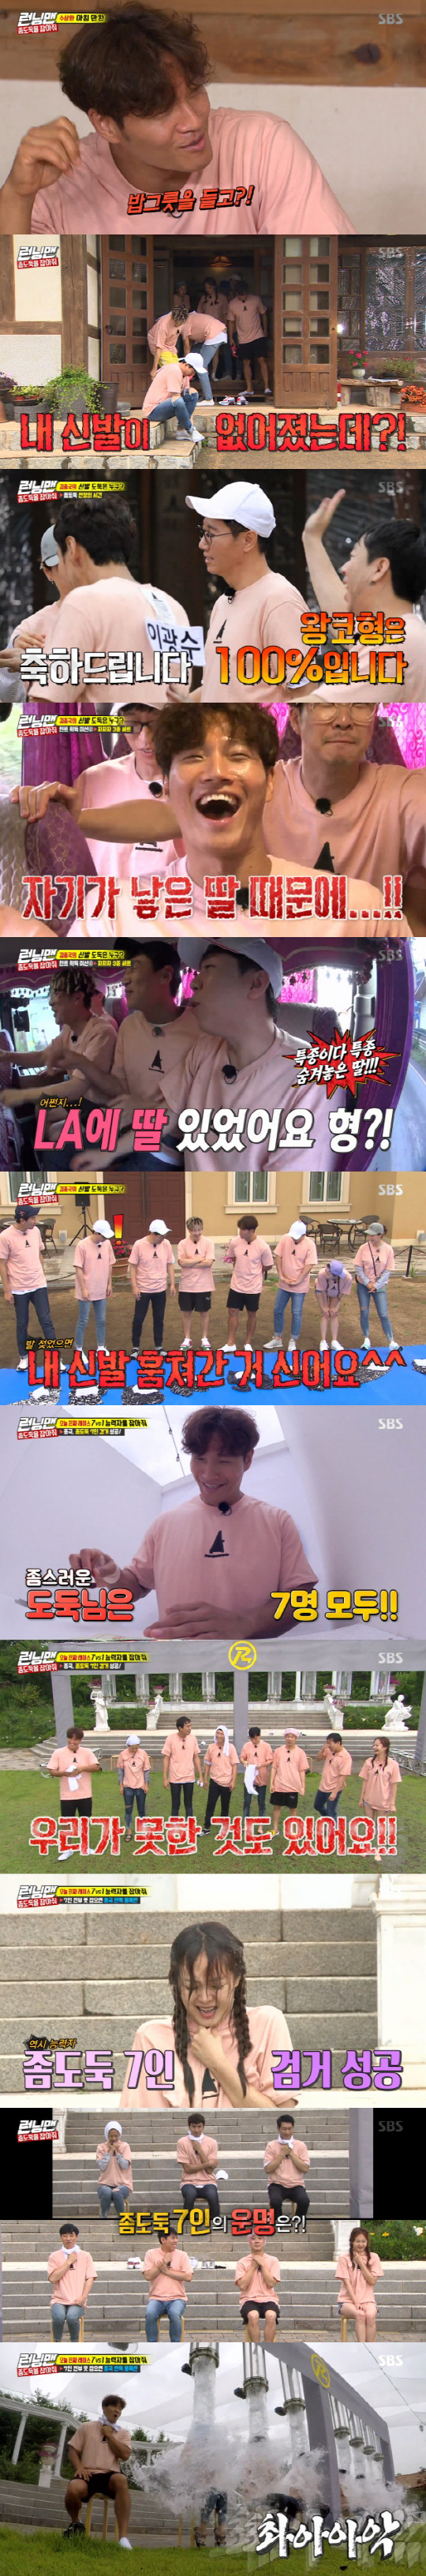 Kim Jong-kook arrested The Little Thief party to avoid water bomb penalties.On SBS Running Man broadcasted on the 29th, the wish of singer Kim Jong-kook was revealed.At the opening, the crew had a breakfast dinner at a limited restaurant for the hard-working cast, but the cast members doubted what the crew continued to lose, saying, Its a prize.Kim Jong-kooks shoes disappeared as he headed to the yard for the real opening.Here, a mission called Get The Little Thief You Stealed unfolded: PD Get me some of The Little Thiefs body hints.If you unanimously arrest The Little Thief, its a success.The arrested Little Thief will carry out water bomb penalties, and on the contrary, all members will receive water bomb penalties when they fail. Running Man members all suspected Ji Suk-jin as a spy, as he was the only one to stand up with a bowl of rice during the meal.Running Man then succeeded in a hint-taking mission with the Bubbling mission, which was a mobile mission; the crew released a photo of the criminal with a slightly black spot on the upper elbow.An elbow search led to another suspicion of Ji Suk-jin.In addition, a Random 5-second Talk mission was given to answer three random questions about members within 5 seconds.Here Haha challenged and said, Why does Kim Jong-kook often go to LA?Haha answered the last third answer, saying, I have a daughter hidden in LA. Kim Jong-kook, who wrote an unfair falsification, said, I suddenly thought I wanted to have a real daughter in LA.Then I will go to see you every day... Then Ji Suk-jin laughed, Do you have a real daughter?, and Kim Jong-kook responded, Give me your shoes, causing a laugh.A photo of The Little Thiefs body features has been released since the throwing away from the shoes pocket mission.Hints showed The Little Thief had clean hairless legs - as well as The Little Thiefs wrists were thick, narrowing to men.Everything was in a situation where it fits in with Ji Suk-jin.Get The Little Thief last mission was a punch quiz - the hand of the woman signing here was the hand of the woman.In the opening, Kim Jong-kook told Jeon So-min: Why give me flowers, not the one who gives me flowers, not the one who gives me.Why did you try to sit next to me? An anecdote about an hour before the shoot was released here, and it turns out that all members except Kim Jong-kook were released as The Little Thief.The crew said, Even if it was 2-1, 3-1, I did not win Kim Jong-kook.This time, we gave him the opportunity to catch Kim Jong-kook, a talented person with a 7-1 lead. However, the production team explained, Kim Jong-kooks shoes are relayed one by one.It is a success if you move down one by one after putting it on the top of the shoe field and move to the car. The Little Thief had been suspected of being one, but as all members were members of The Little Thief, the main characters in the photographs were identified as different members.Kim Jong-kook, who has become increasingly strange, said, I do not think this is one person. He said, I do not talk too much.I thought, Murder, when I was doing She Wrote, did not you say that Ji Suk-jin is all if it is not one of my brothers? The members were embarrassed and did not know what to do.In the end, Kim Jong-kook succeeded in arresting the criminal of The Little Thief 7 with sharp Murder, She Wrote power.All seven members were penalized for water bombs. Yang Se-chan won the Gongjang penalty.